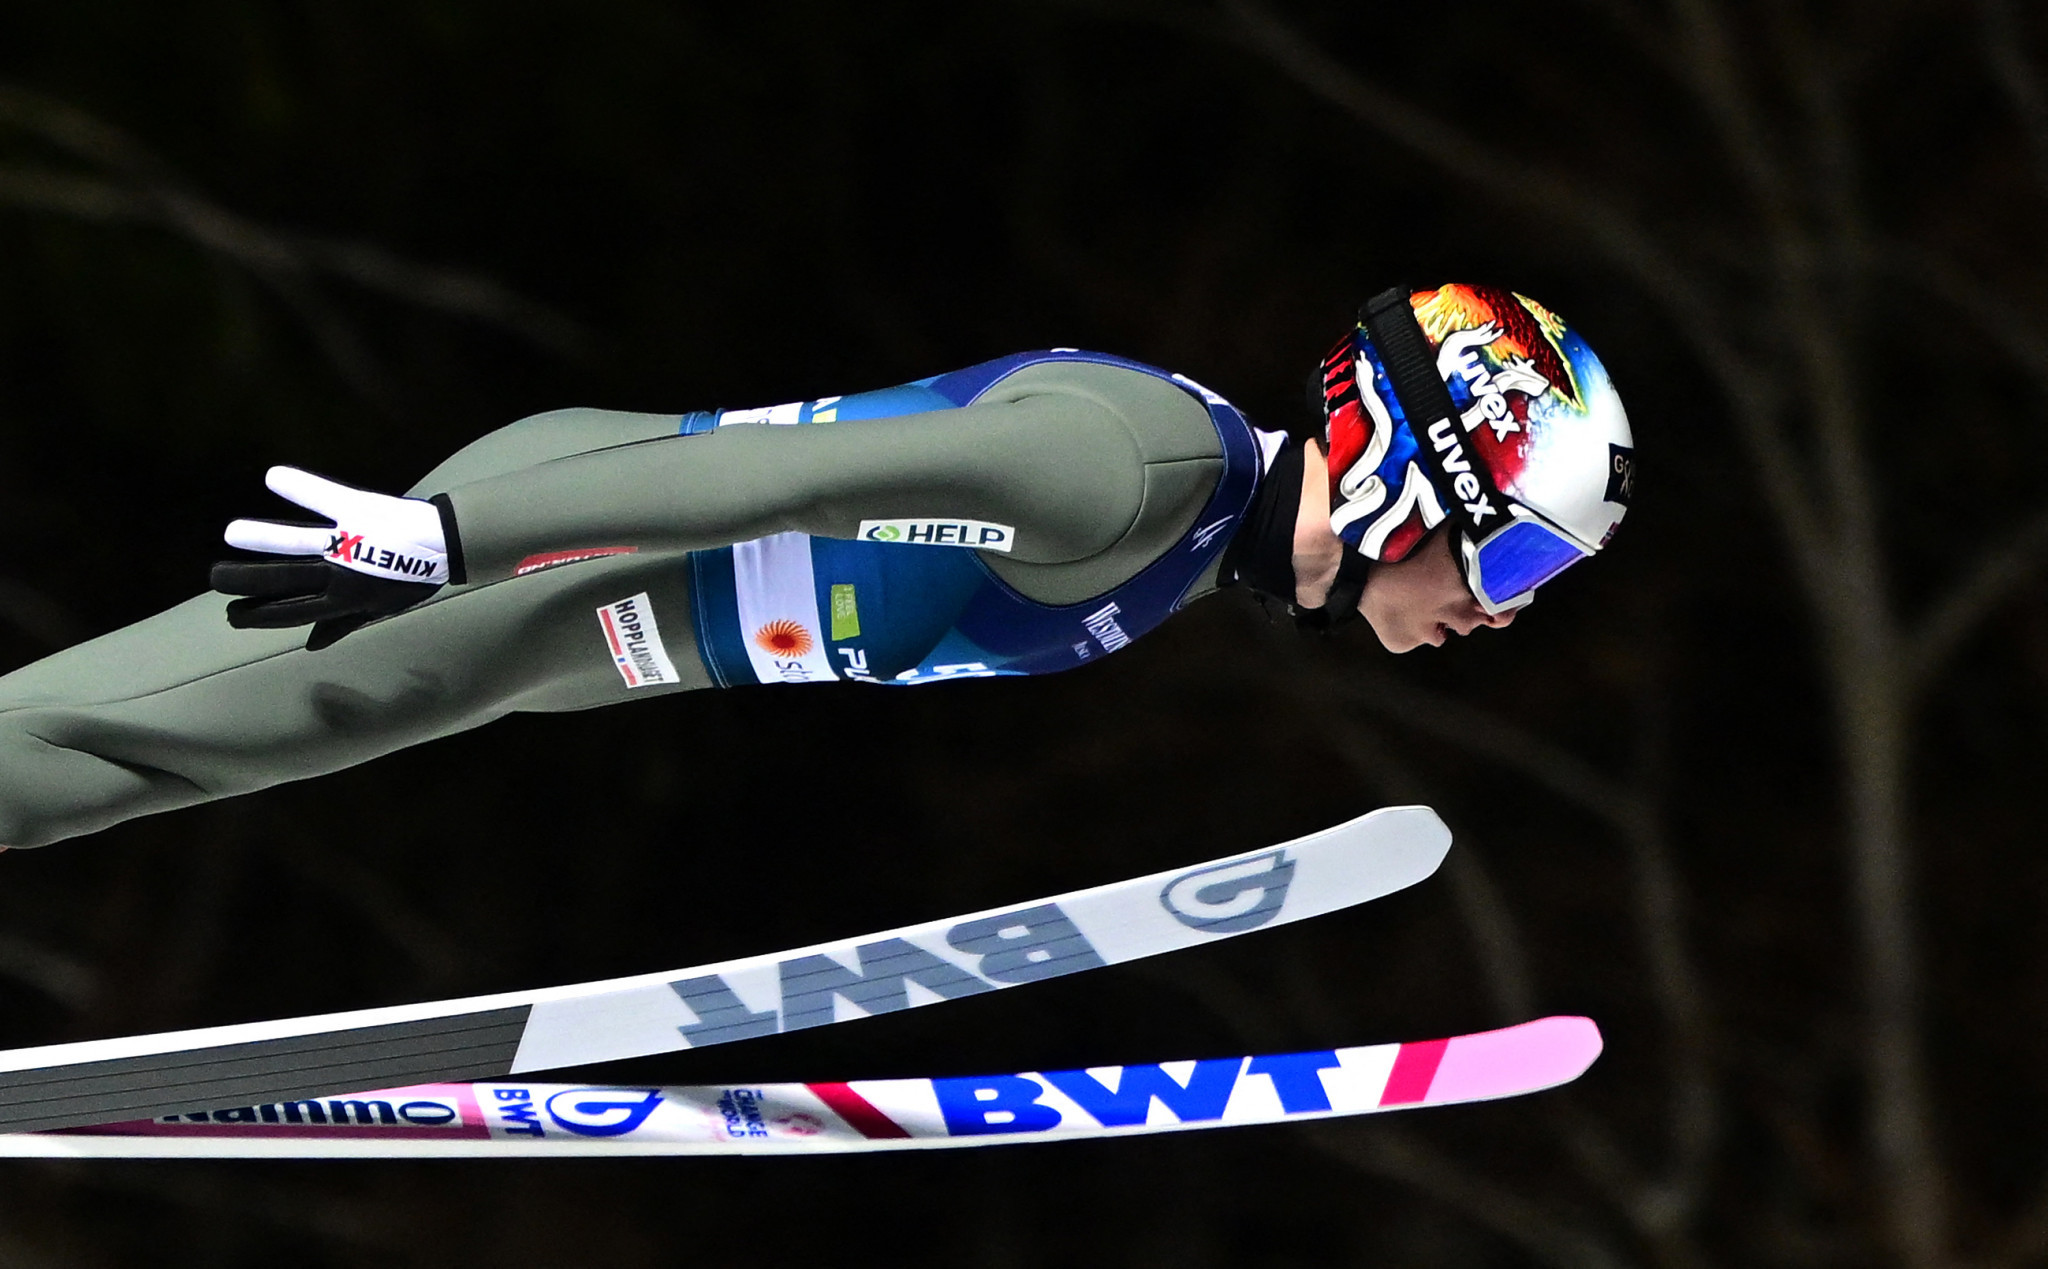 Halvor Egner Granerud extended his FIS Ski Jumping World Cup lead with a win in Norway ©Getty Images